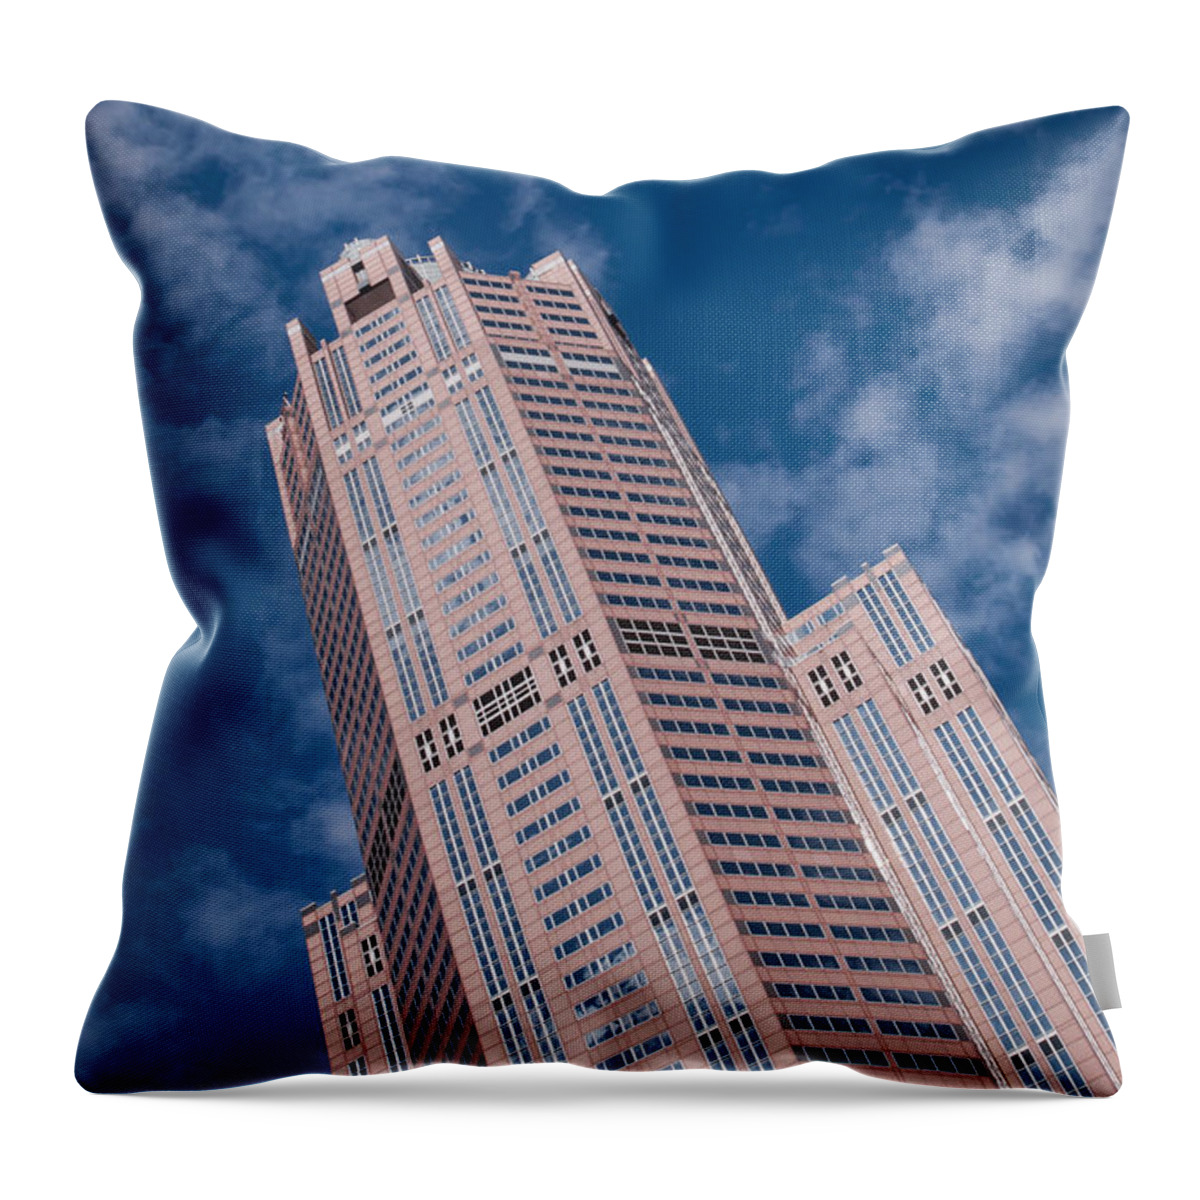 Chicago Downtown Throw Pillow featuring the photograph Chicago Skyscraper by Dejan Jovanovic